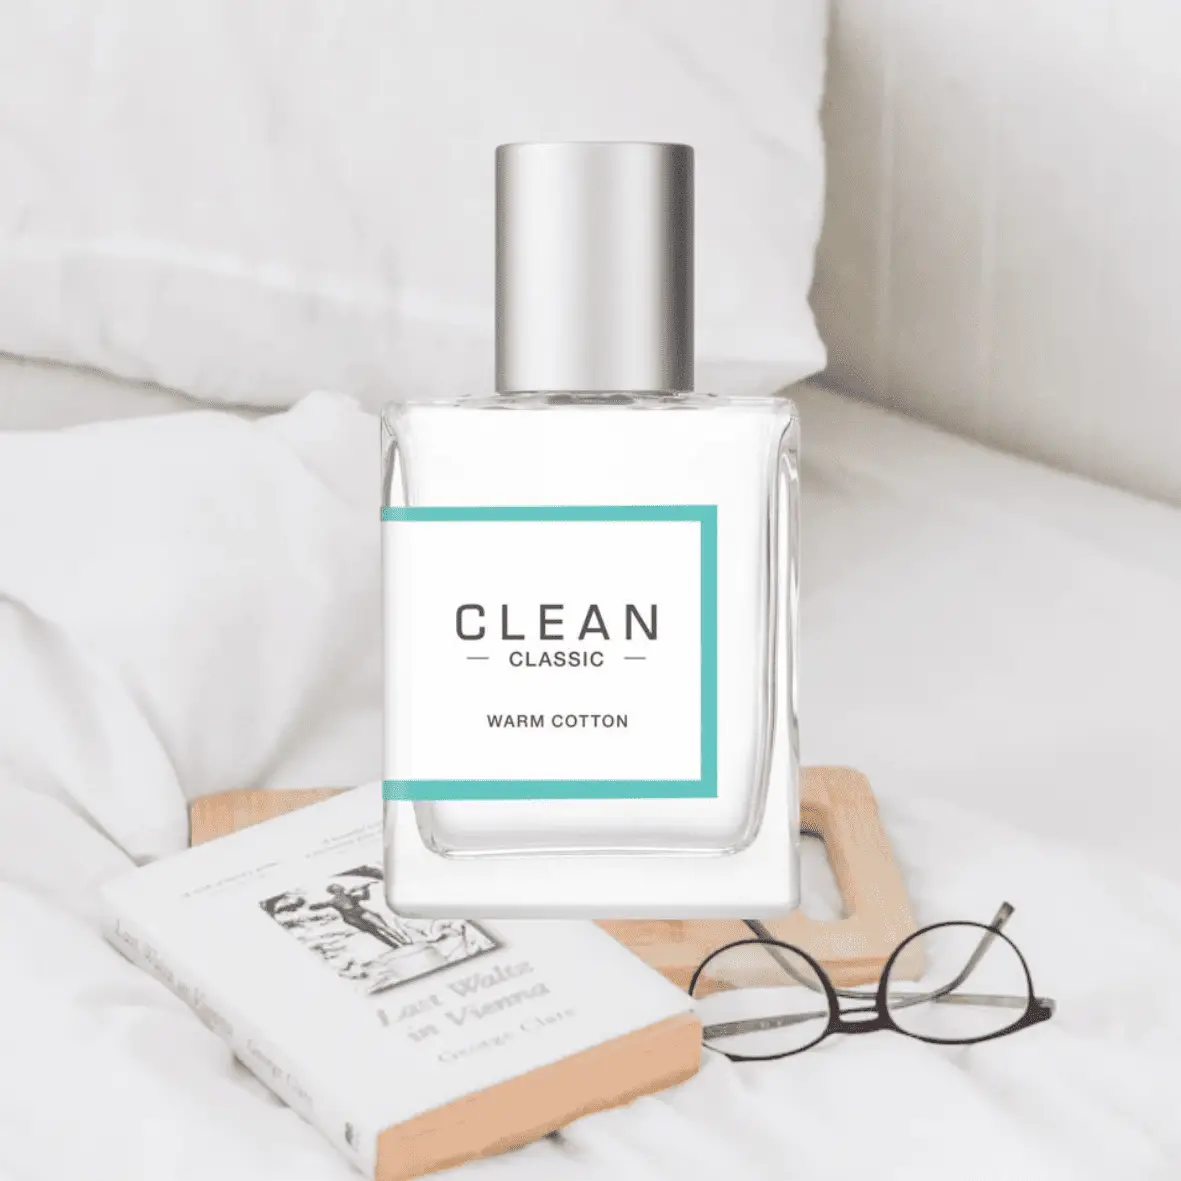 Clean Classic Warm Cotton
Perfumes That Smell like Fresh Laundry